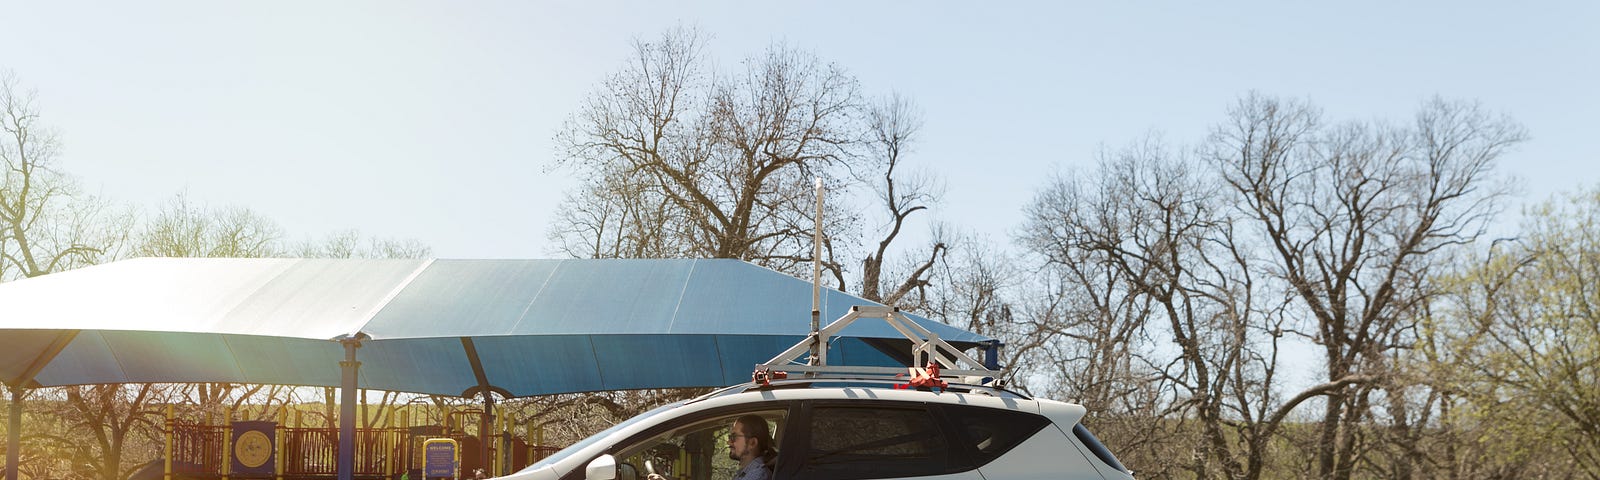 UT Austin researcher drives an SUV equipped with a state-of-the-art air sampling device through a park in eastern Travis County.